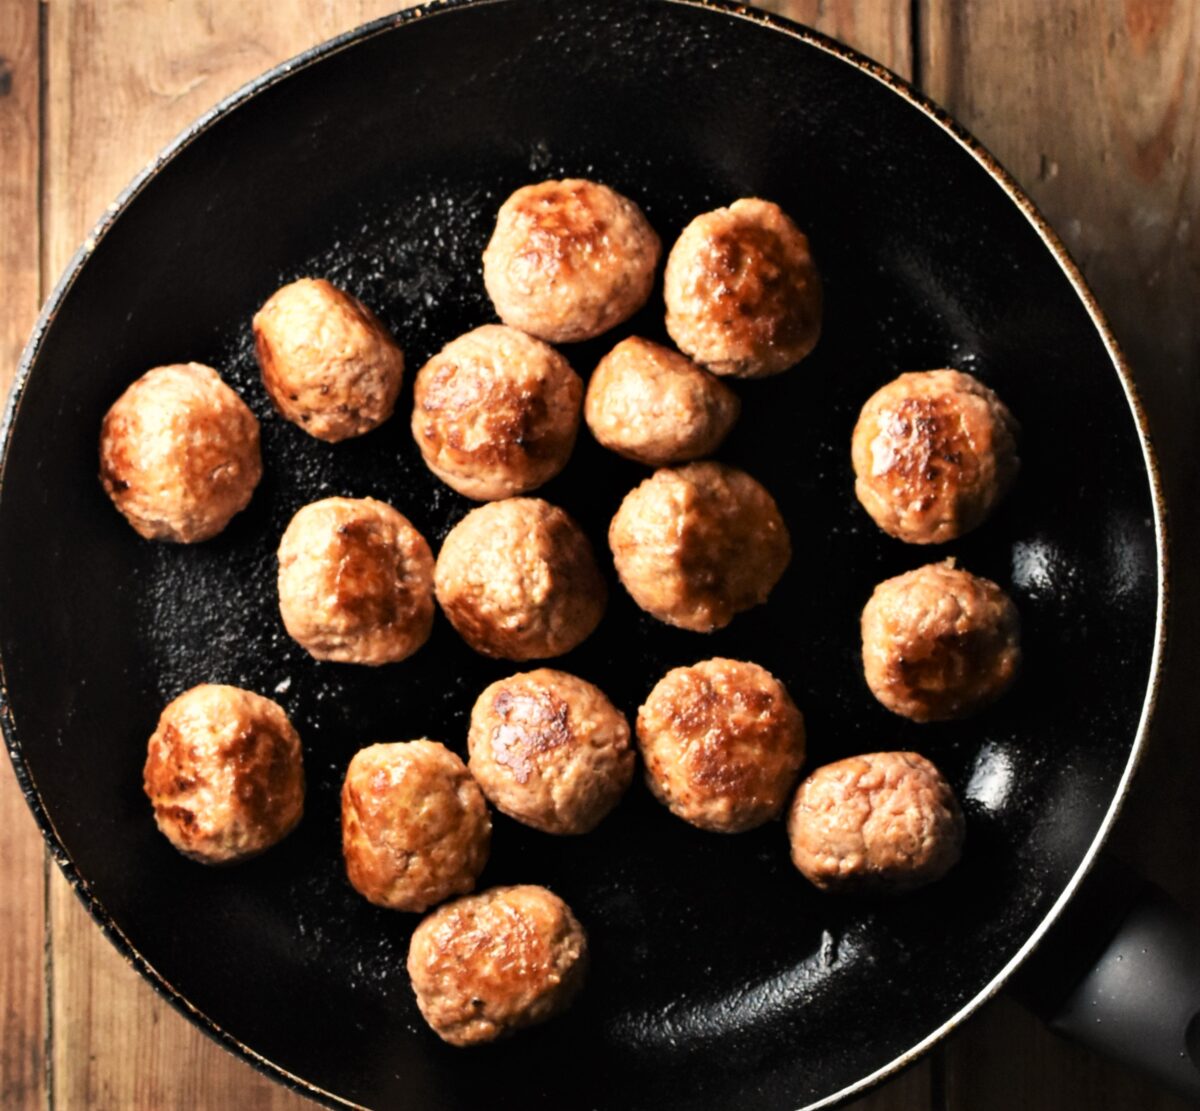 Fried meatballs in large pan.